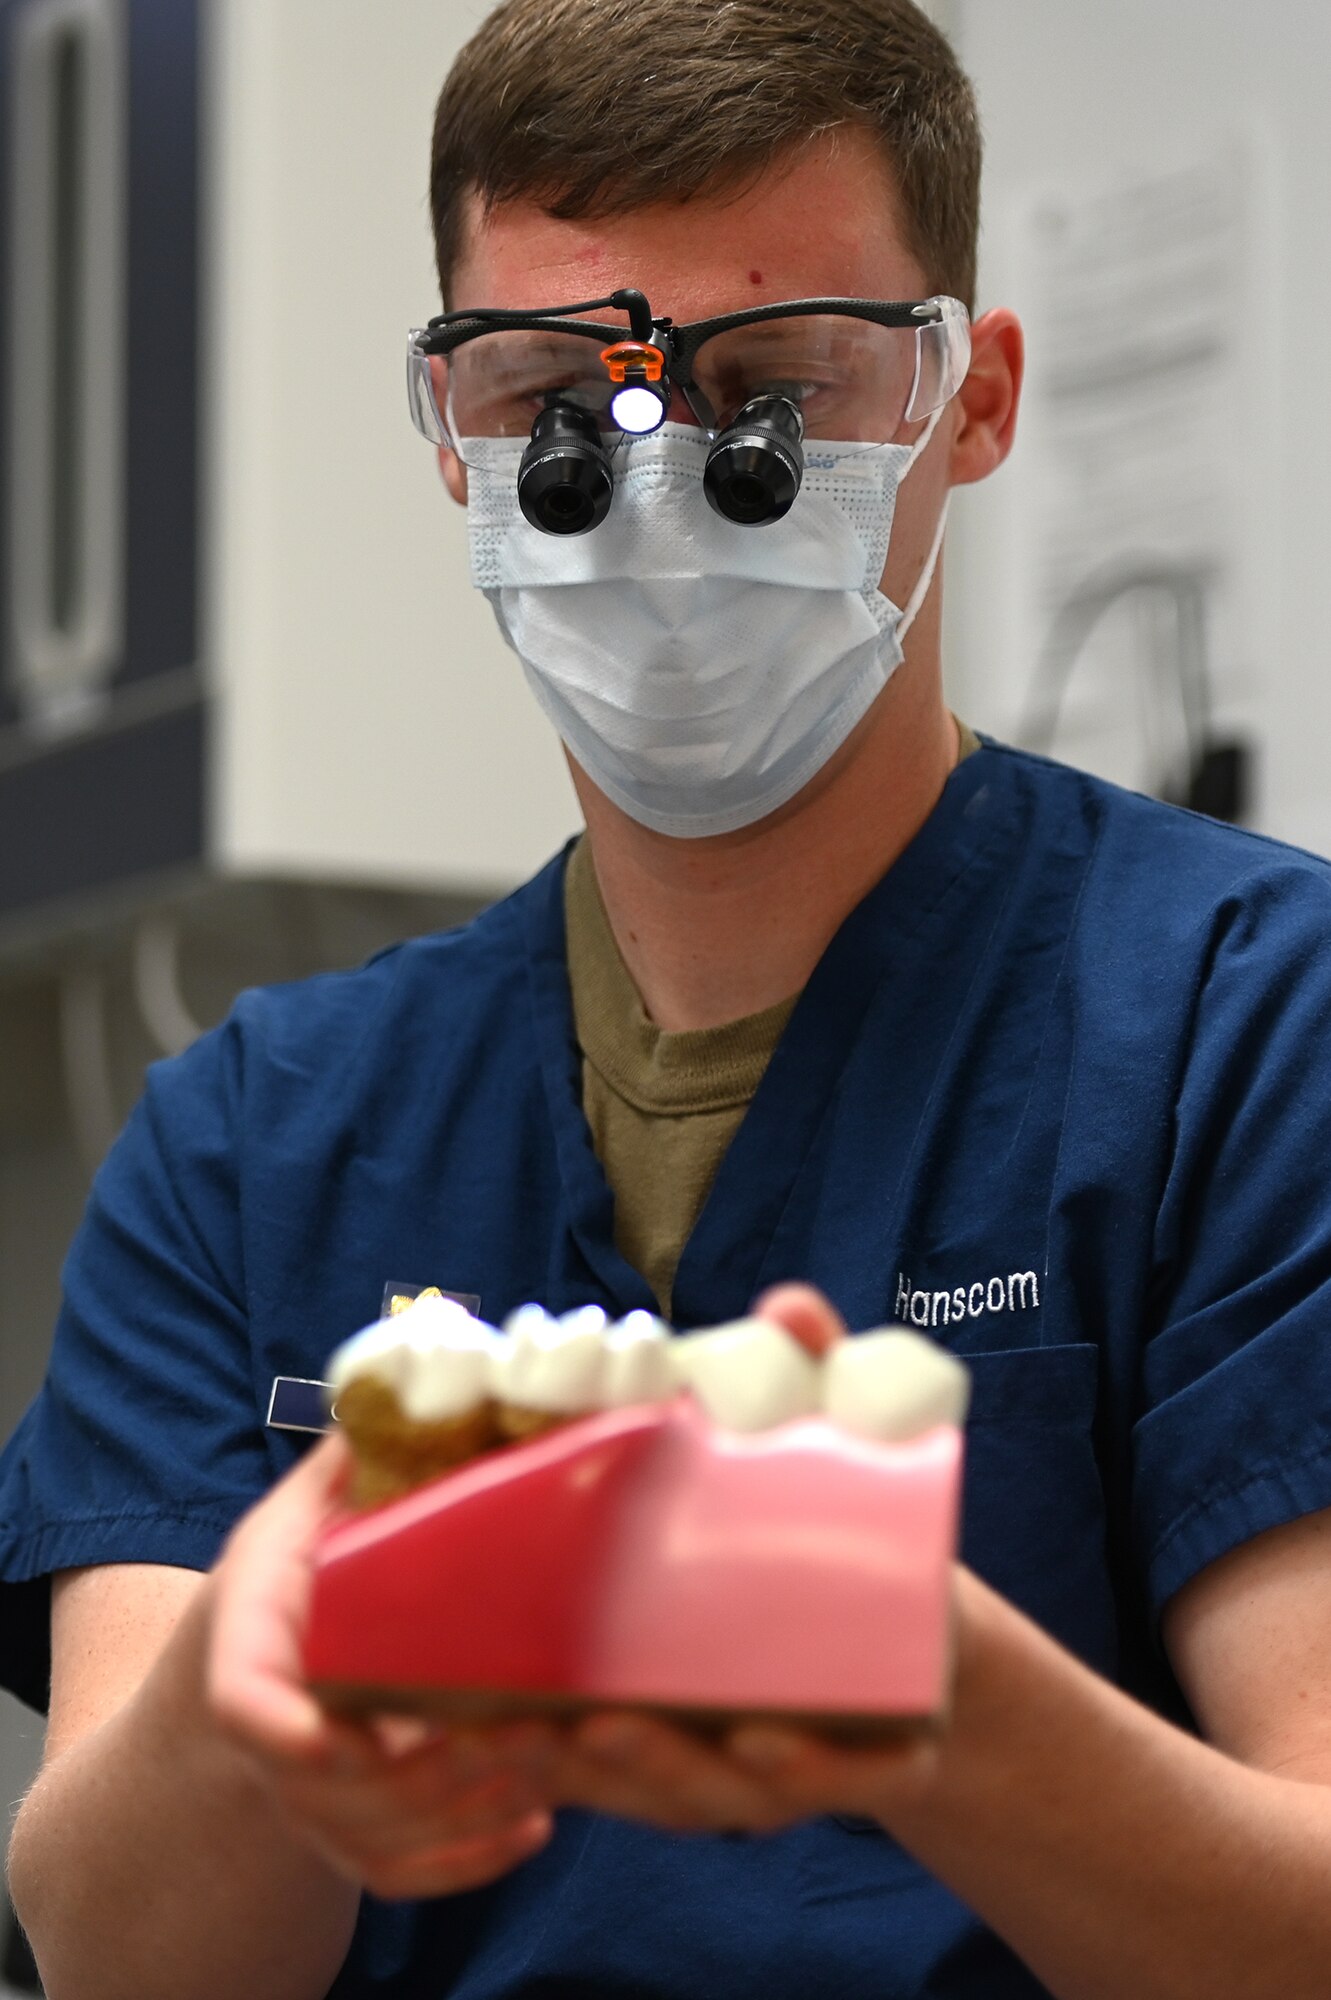 Maj. Thomas O’Connor, 66th Medical Squadron dental operations flight chief, poses for a photo holding a dental model in the medical clinic Nov. 13. O’Connor was recently selected for the Graduate Dental Education program and will attend a periodontics residency at Joint Base San Antonio-Lackland in 2020. (U.S. Air Force photo by Mark Herlihy)